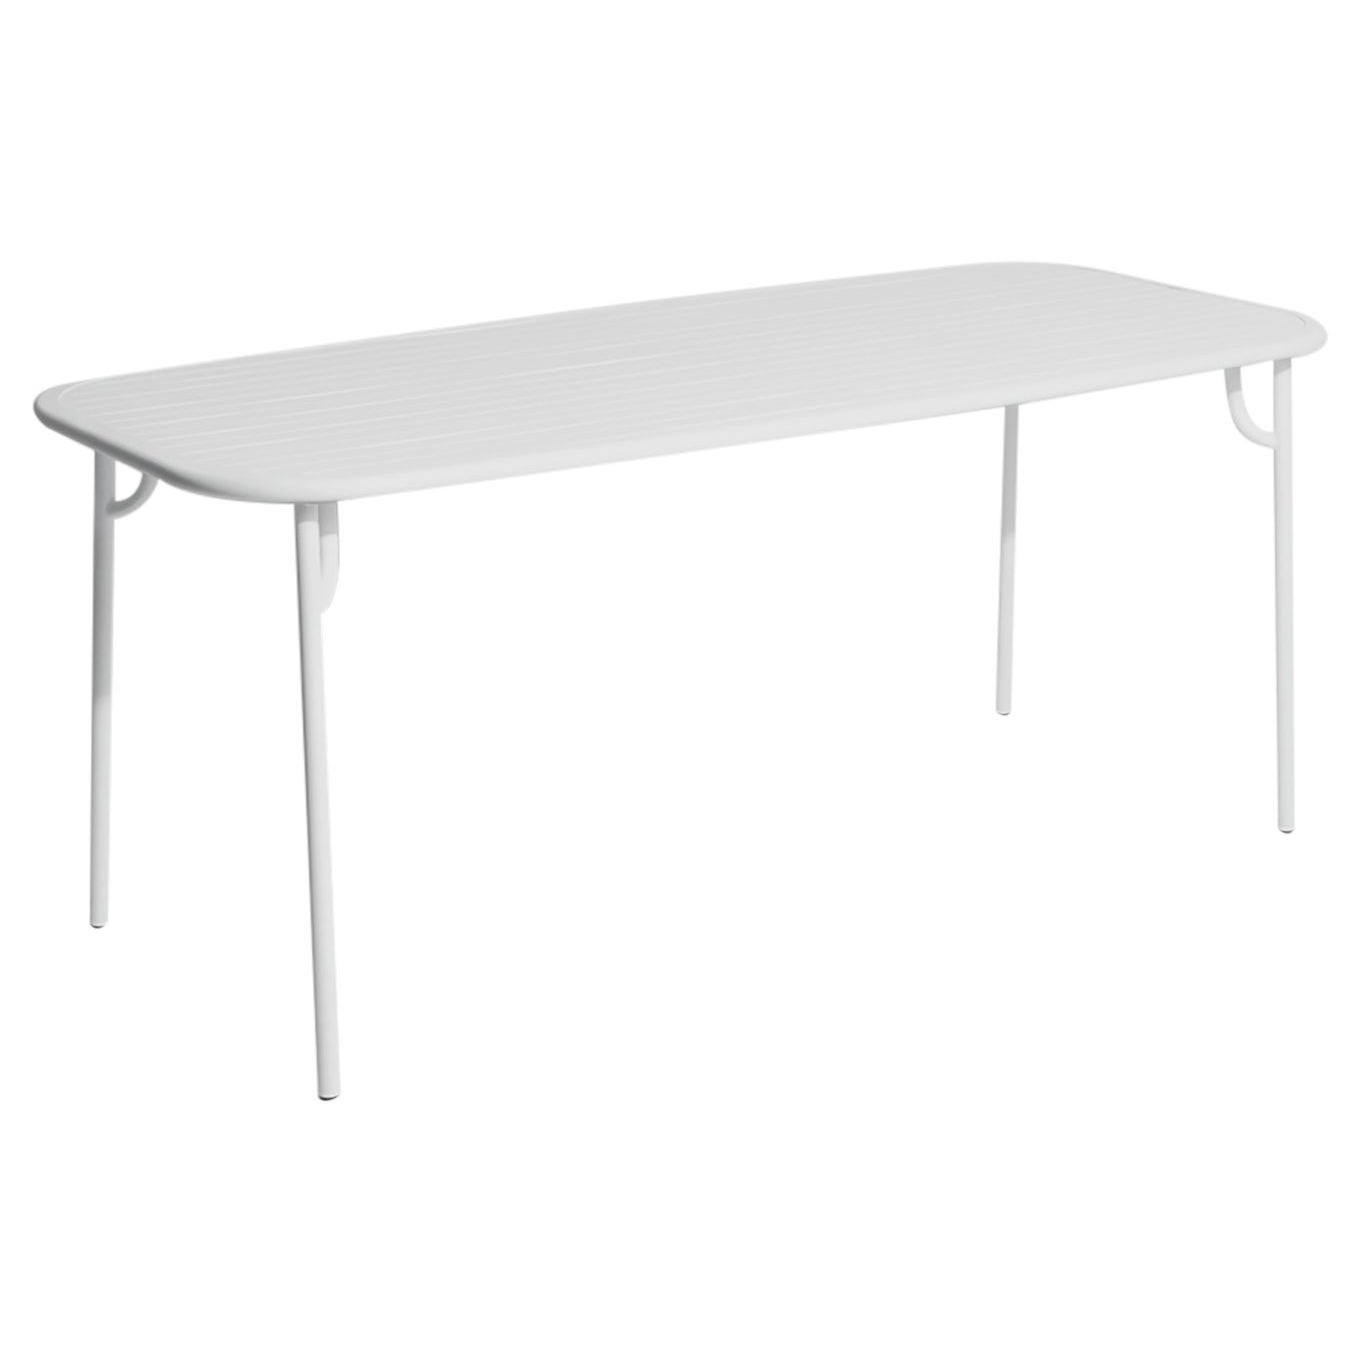 Petite Friture Week-End Medium Rectangular Dining Table in Pearl Grey with Slats For Sale